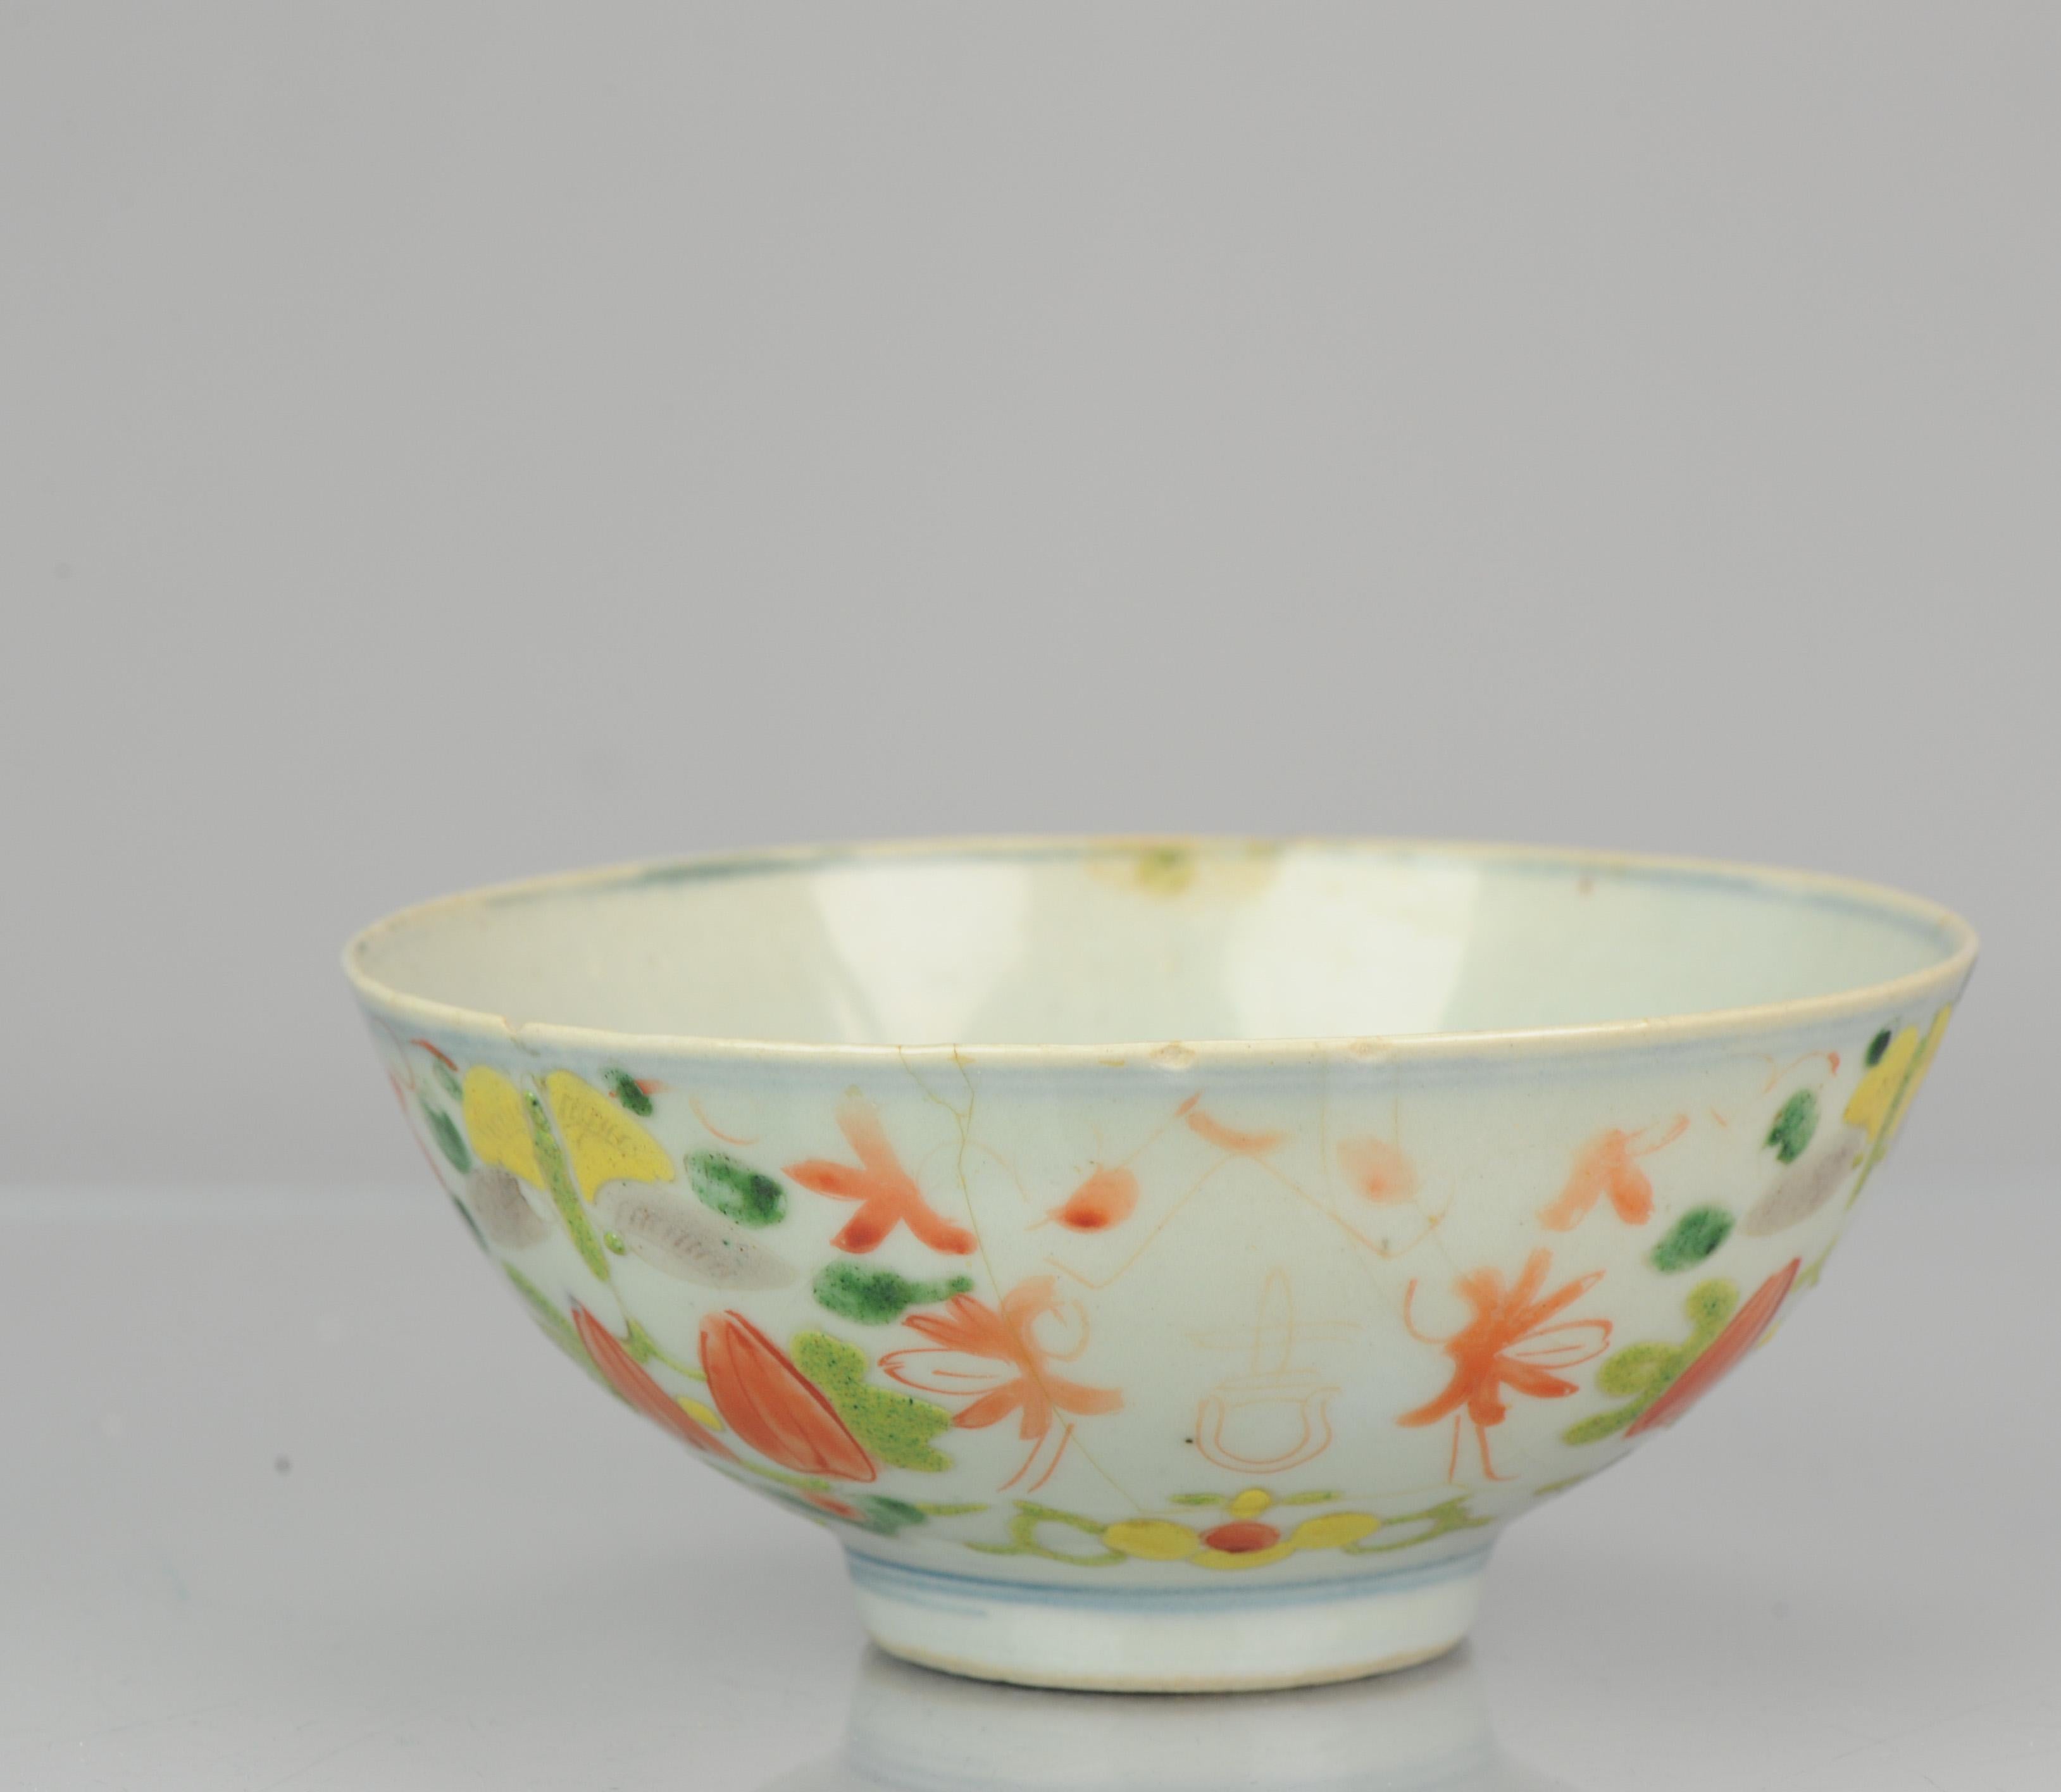 Lovely Chinese porcelain kitchen ch'ing plate in famille rose enamels.

Base is unmarked.

Additional information:
Material: Porcelain
Type: Tea Drinking, Teapots
Region of Origin: China
Period: 19th century Qing (1661 - 1912)
Condition: Overall